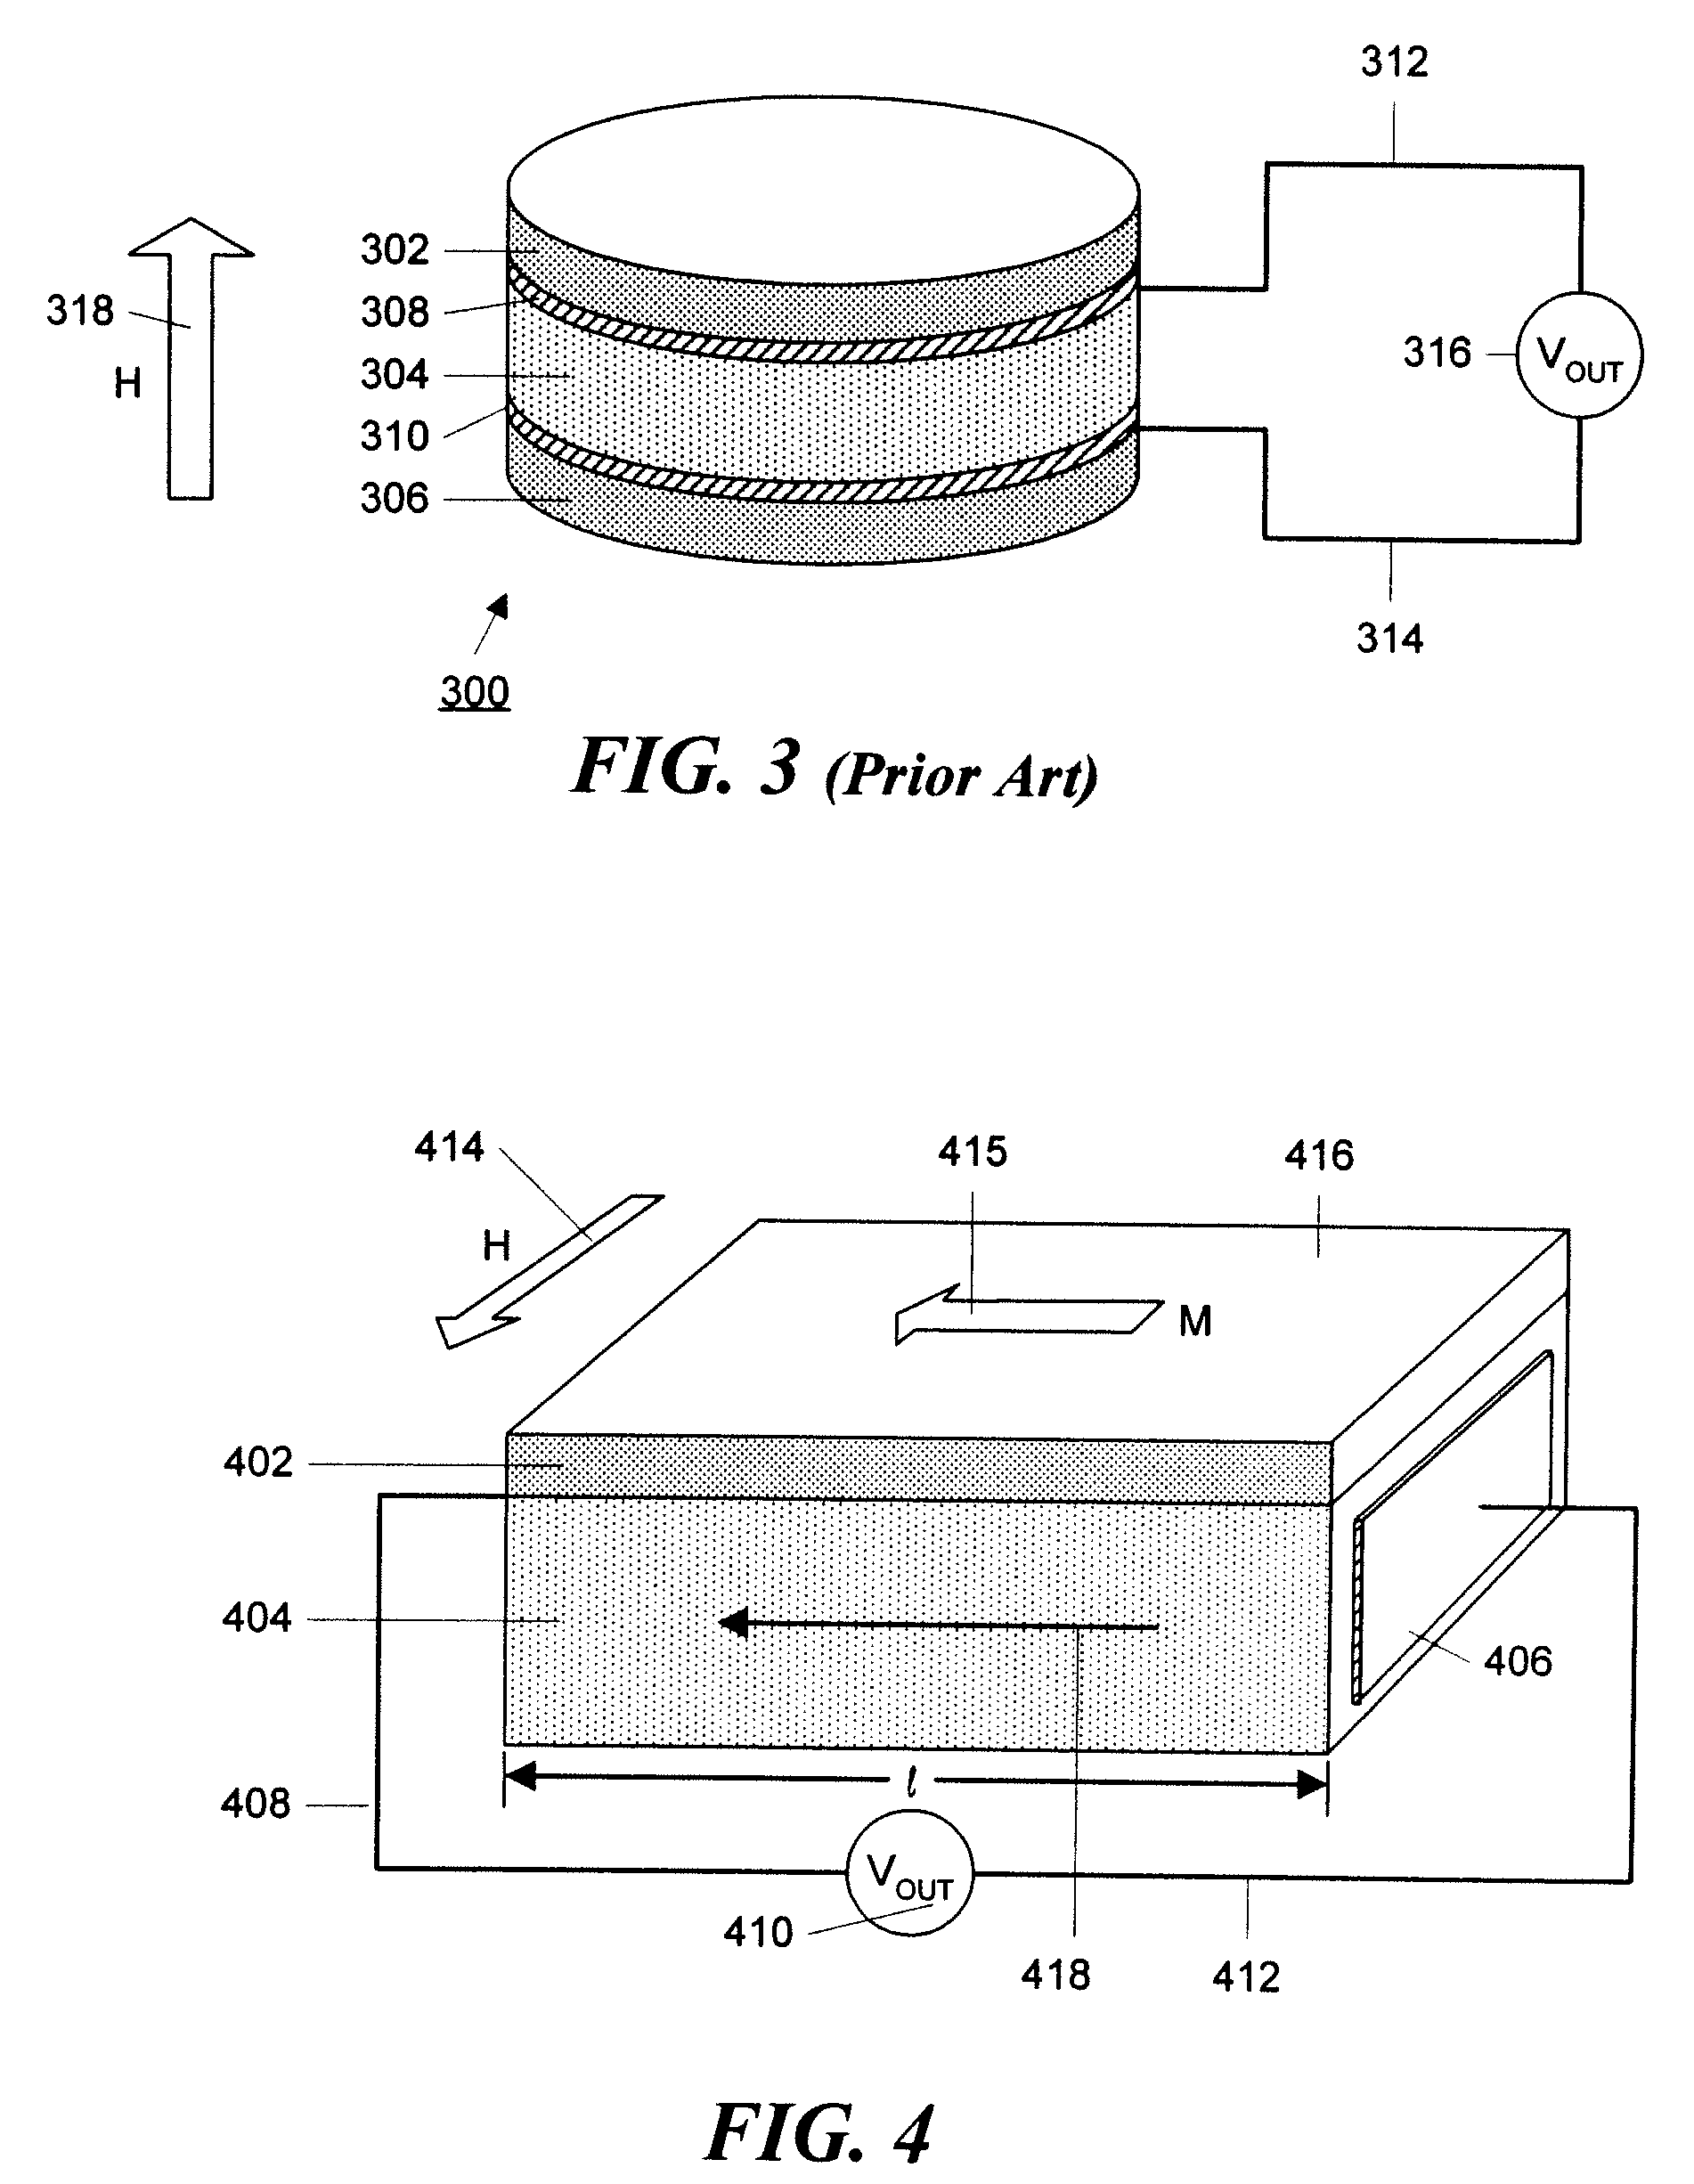 High sensitivity, passive magnetic field sensor and method of manufacture